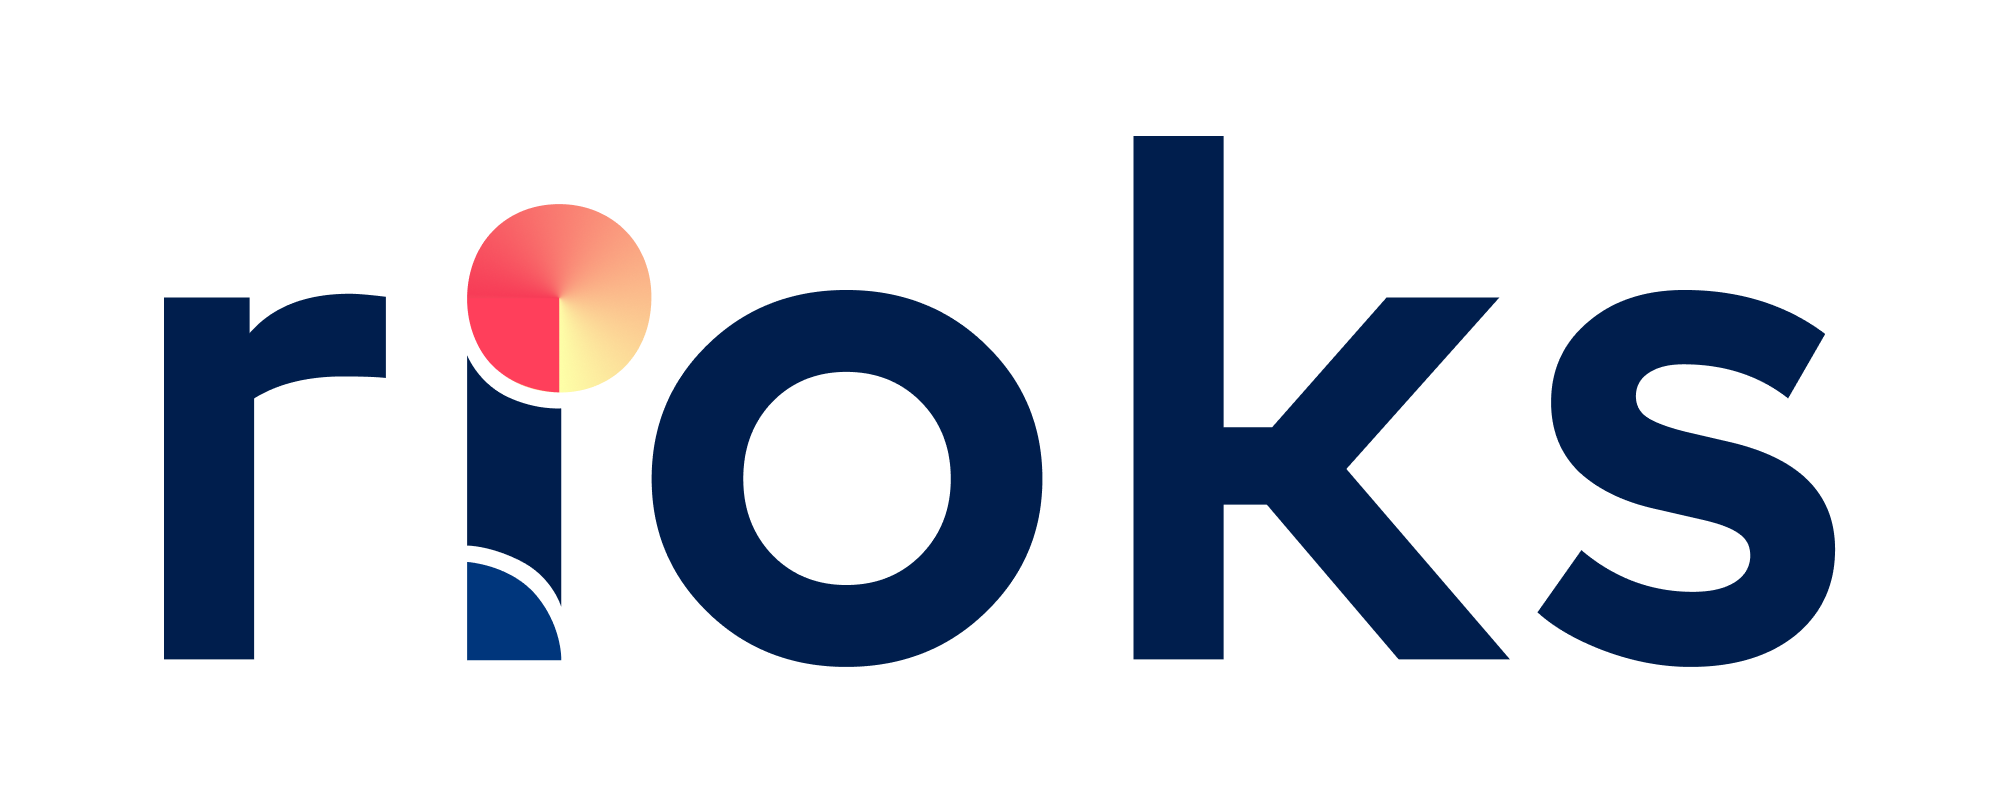 Rioks Agency Services & Qualifications | HubSpot